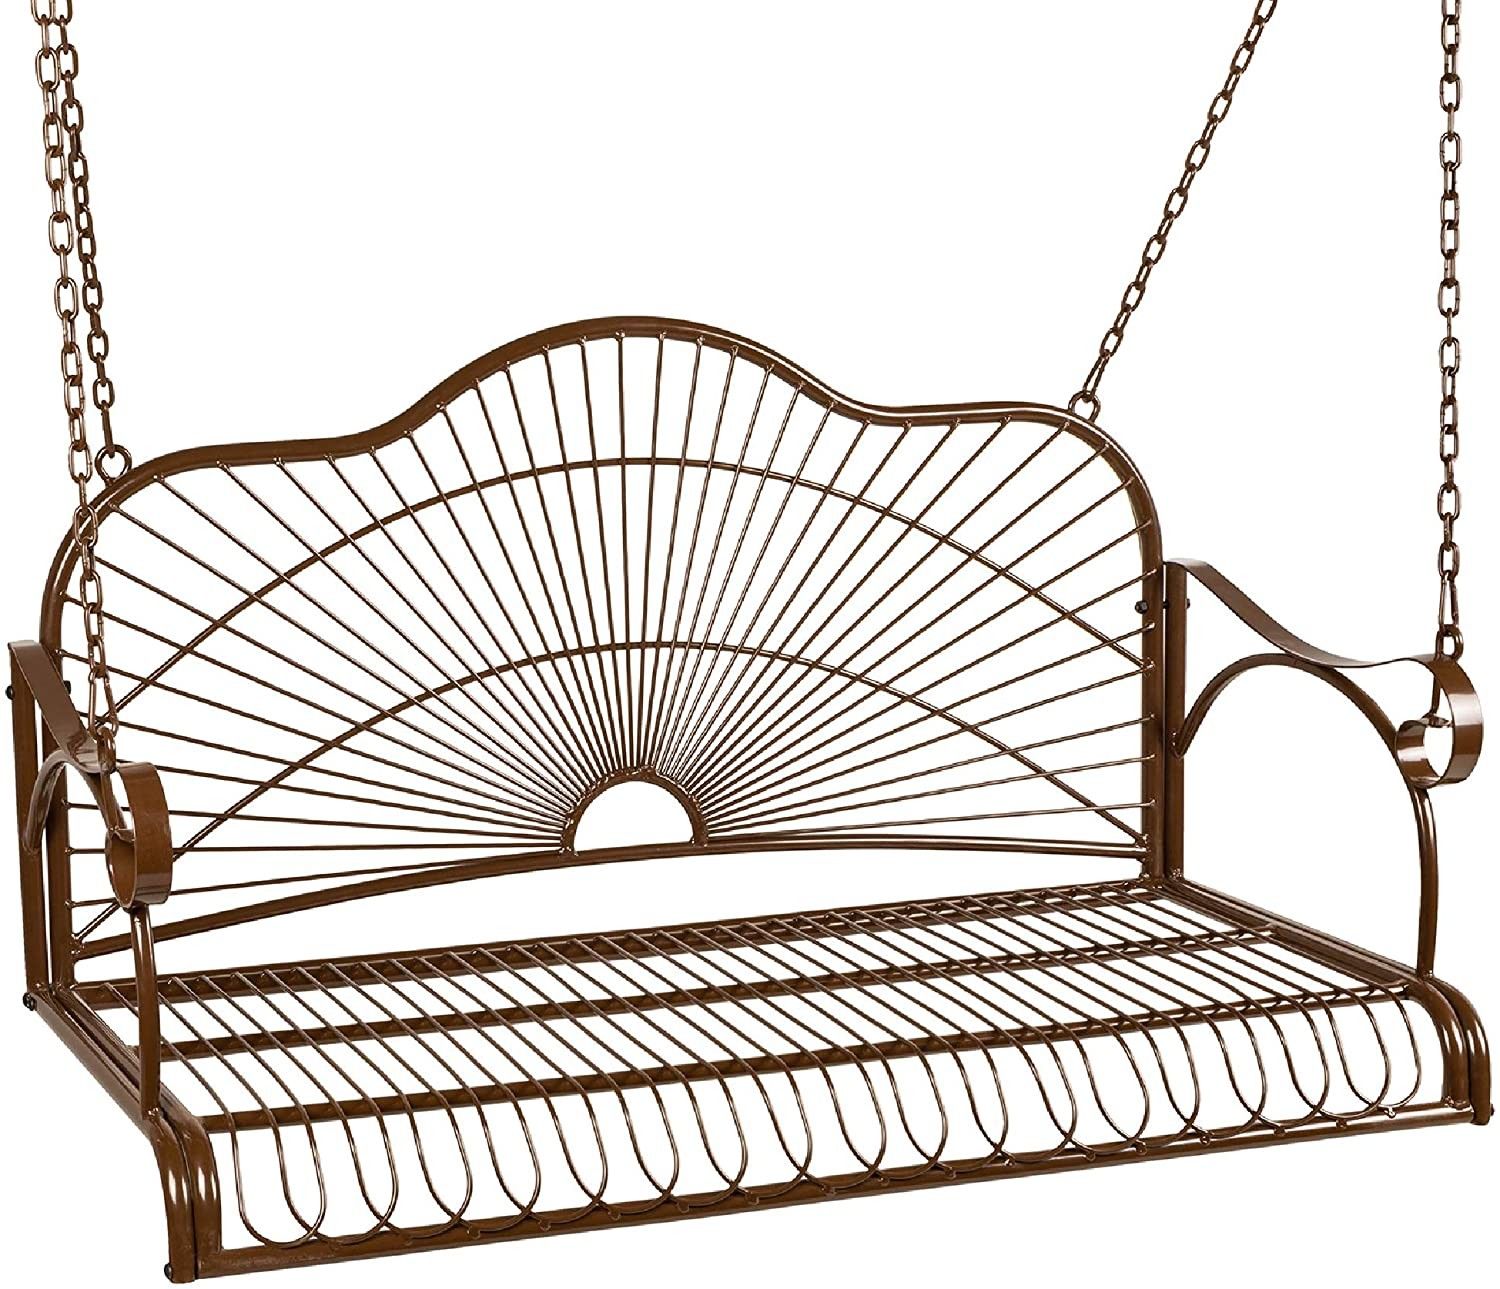 Hanging Porch Swing Chair with Armrests, Iron, Mounting Chains